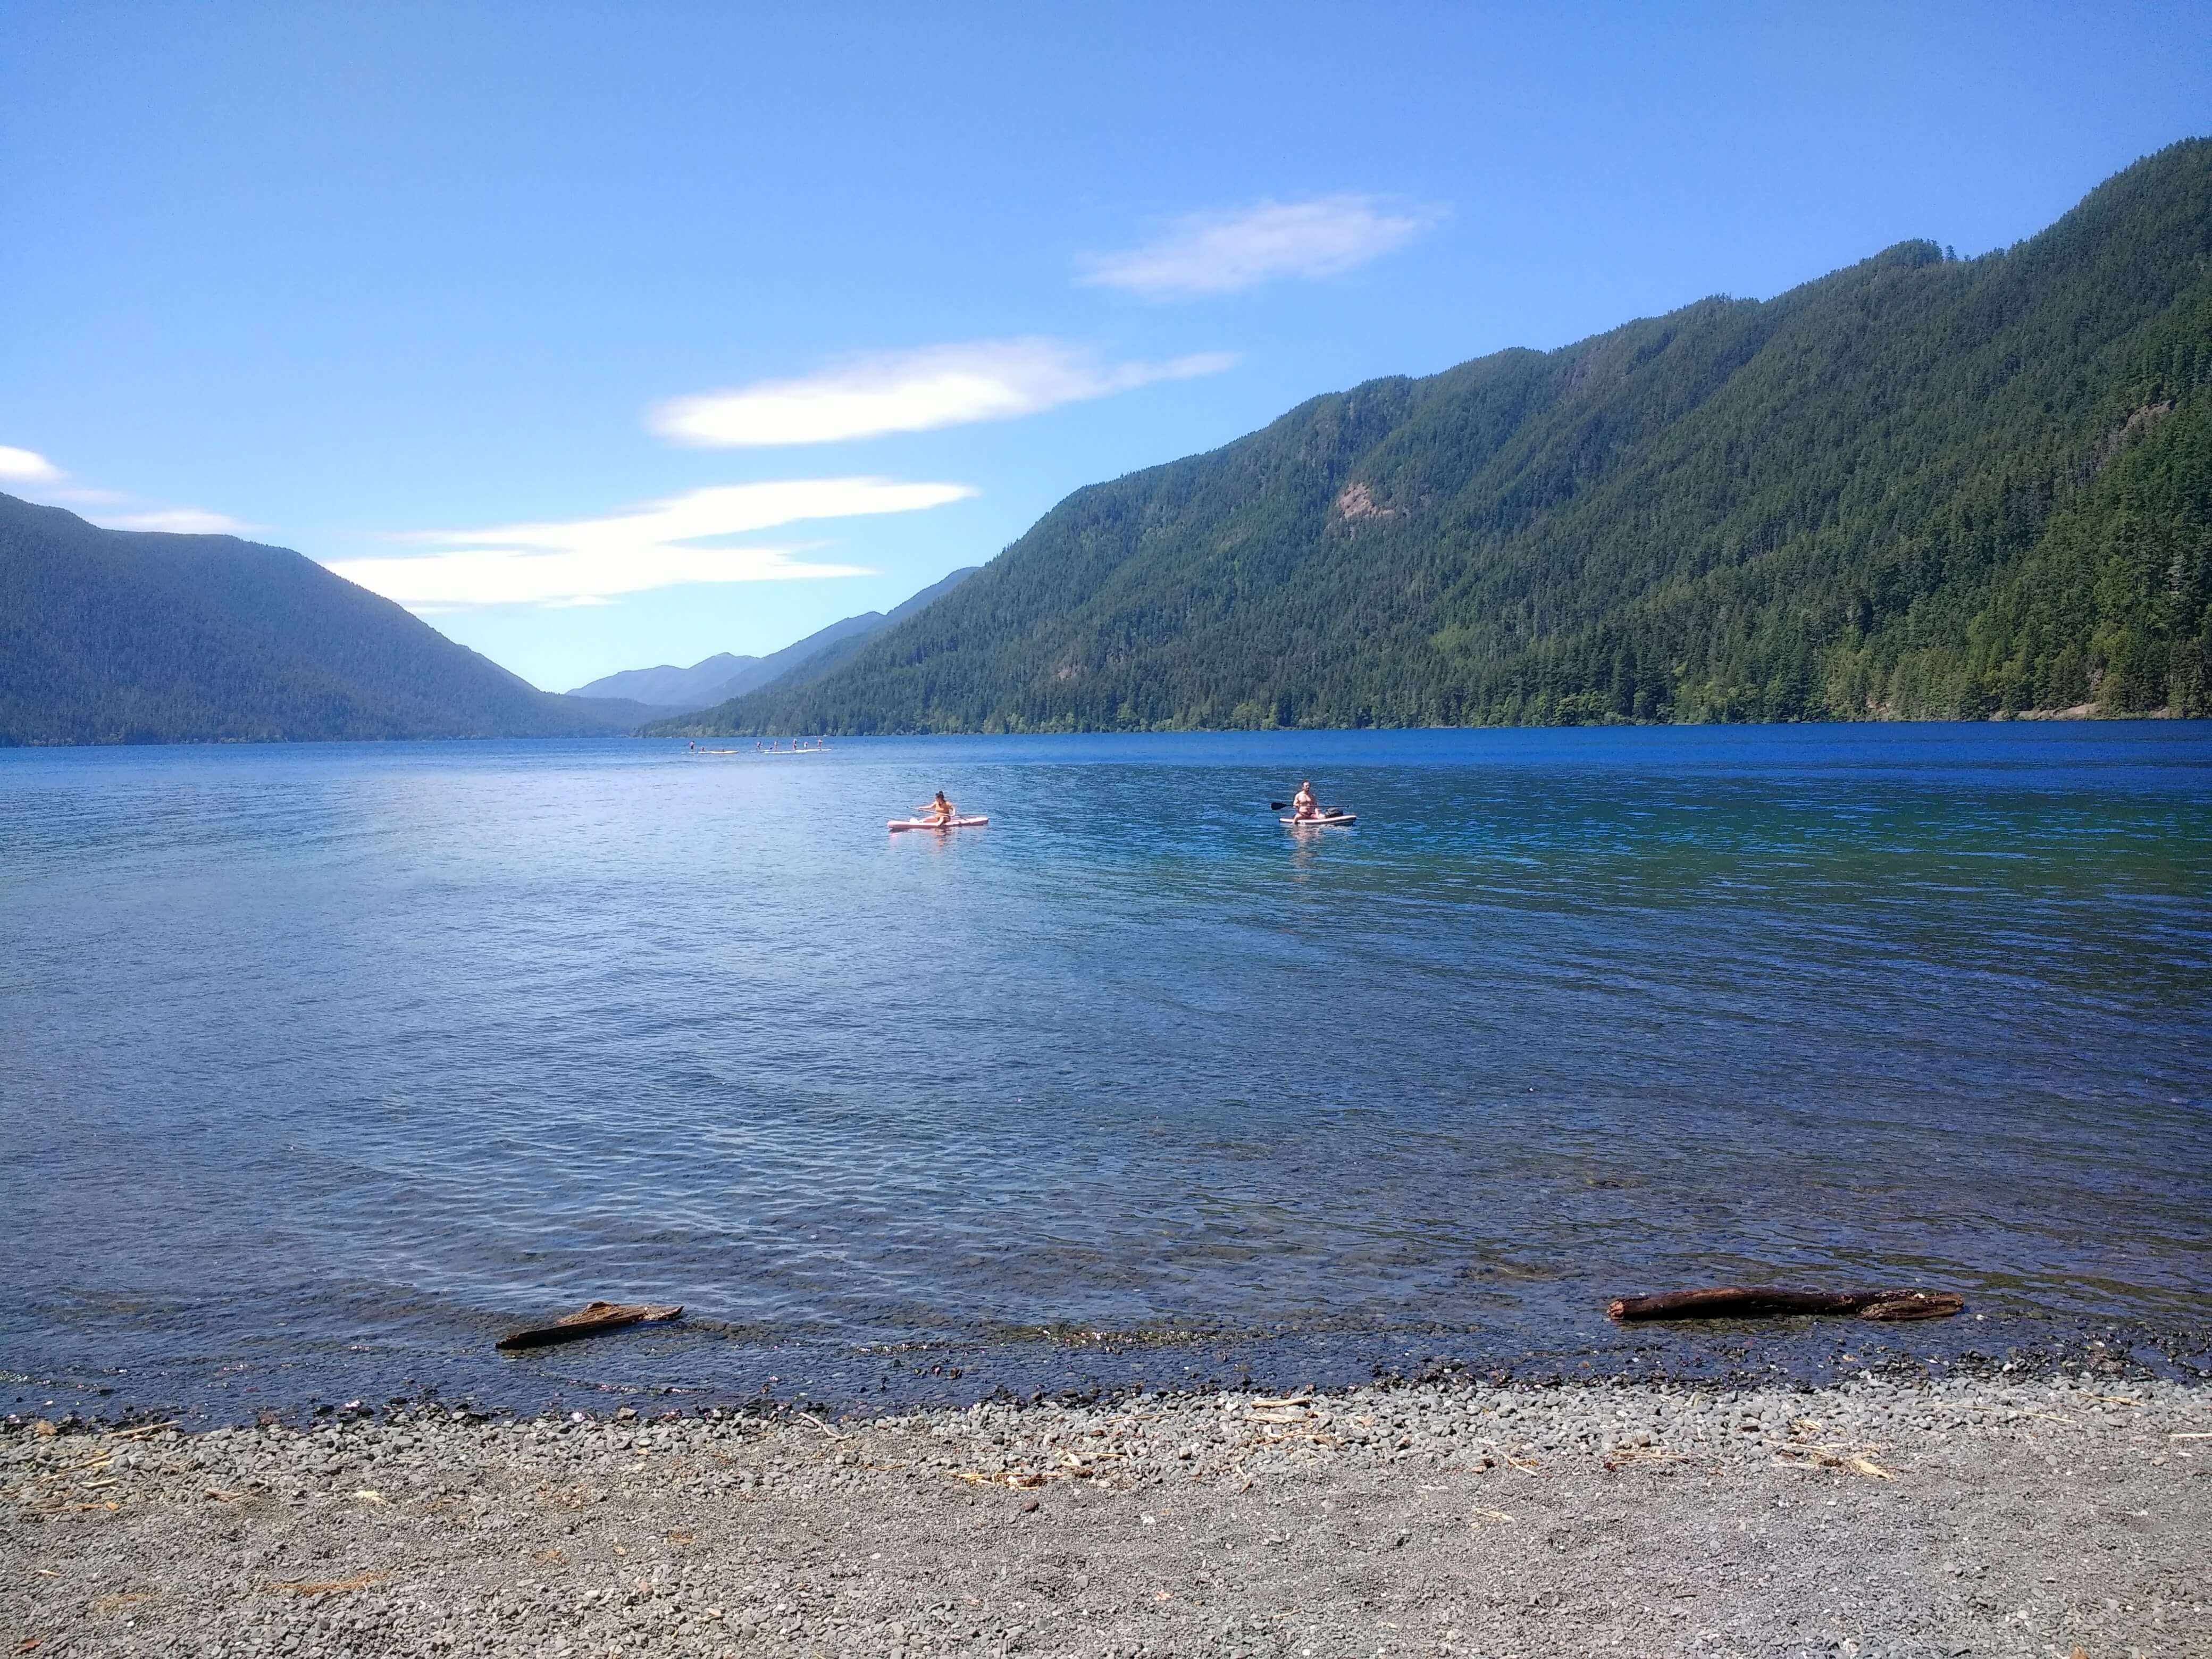 People sitting on paddleboards on Lake Crescent in Olympic National Park